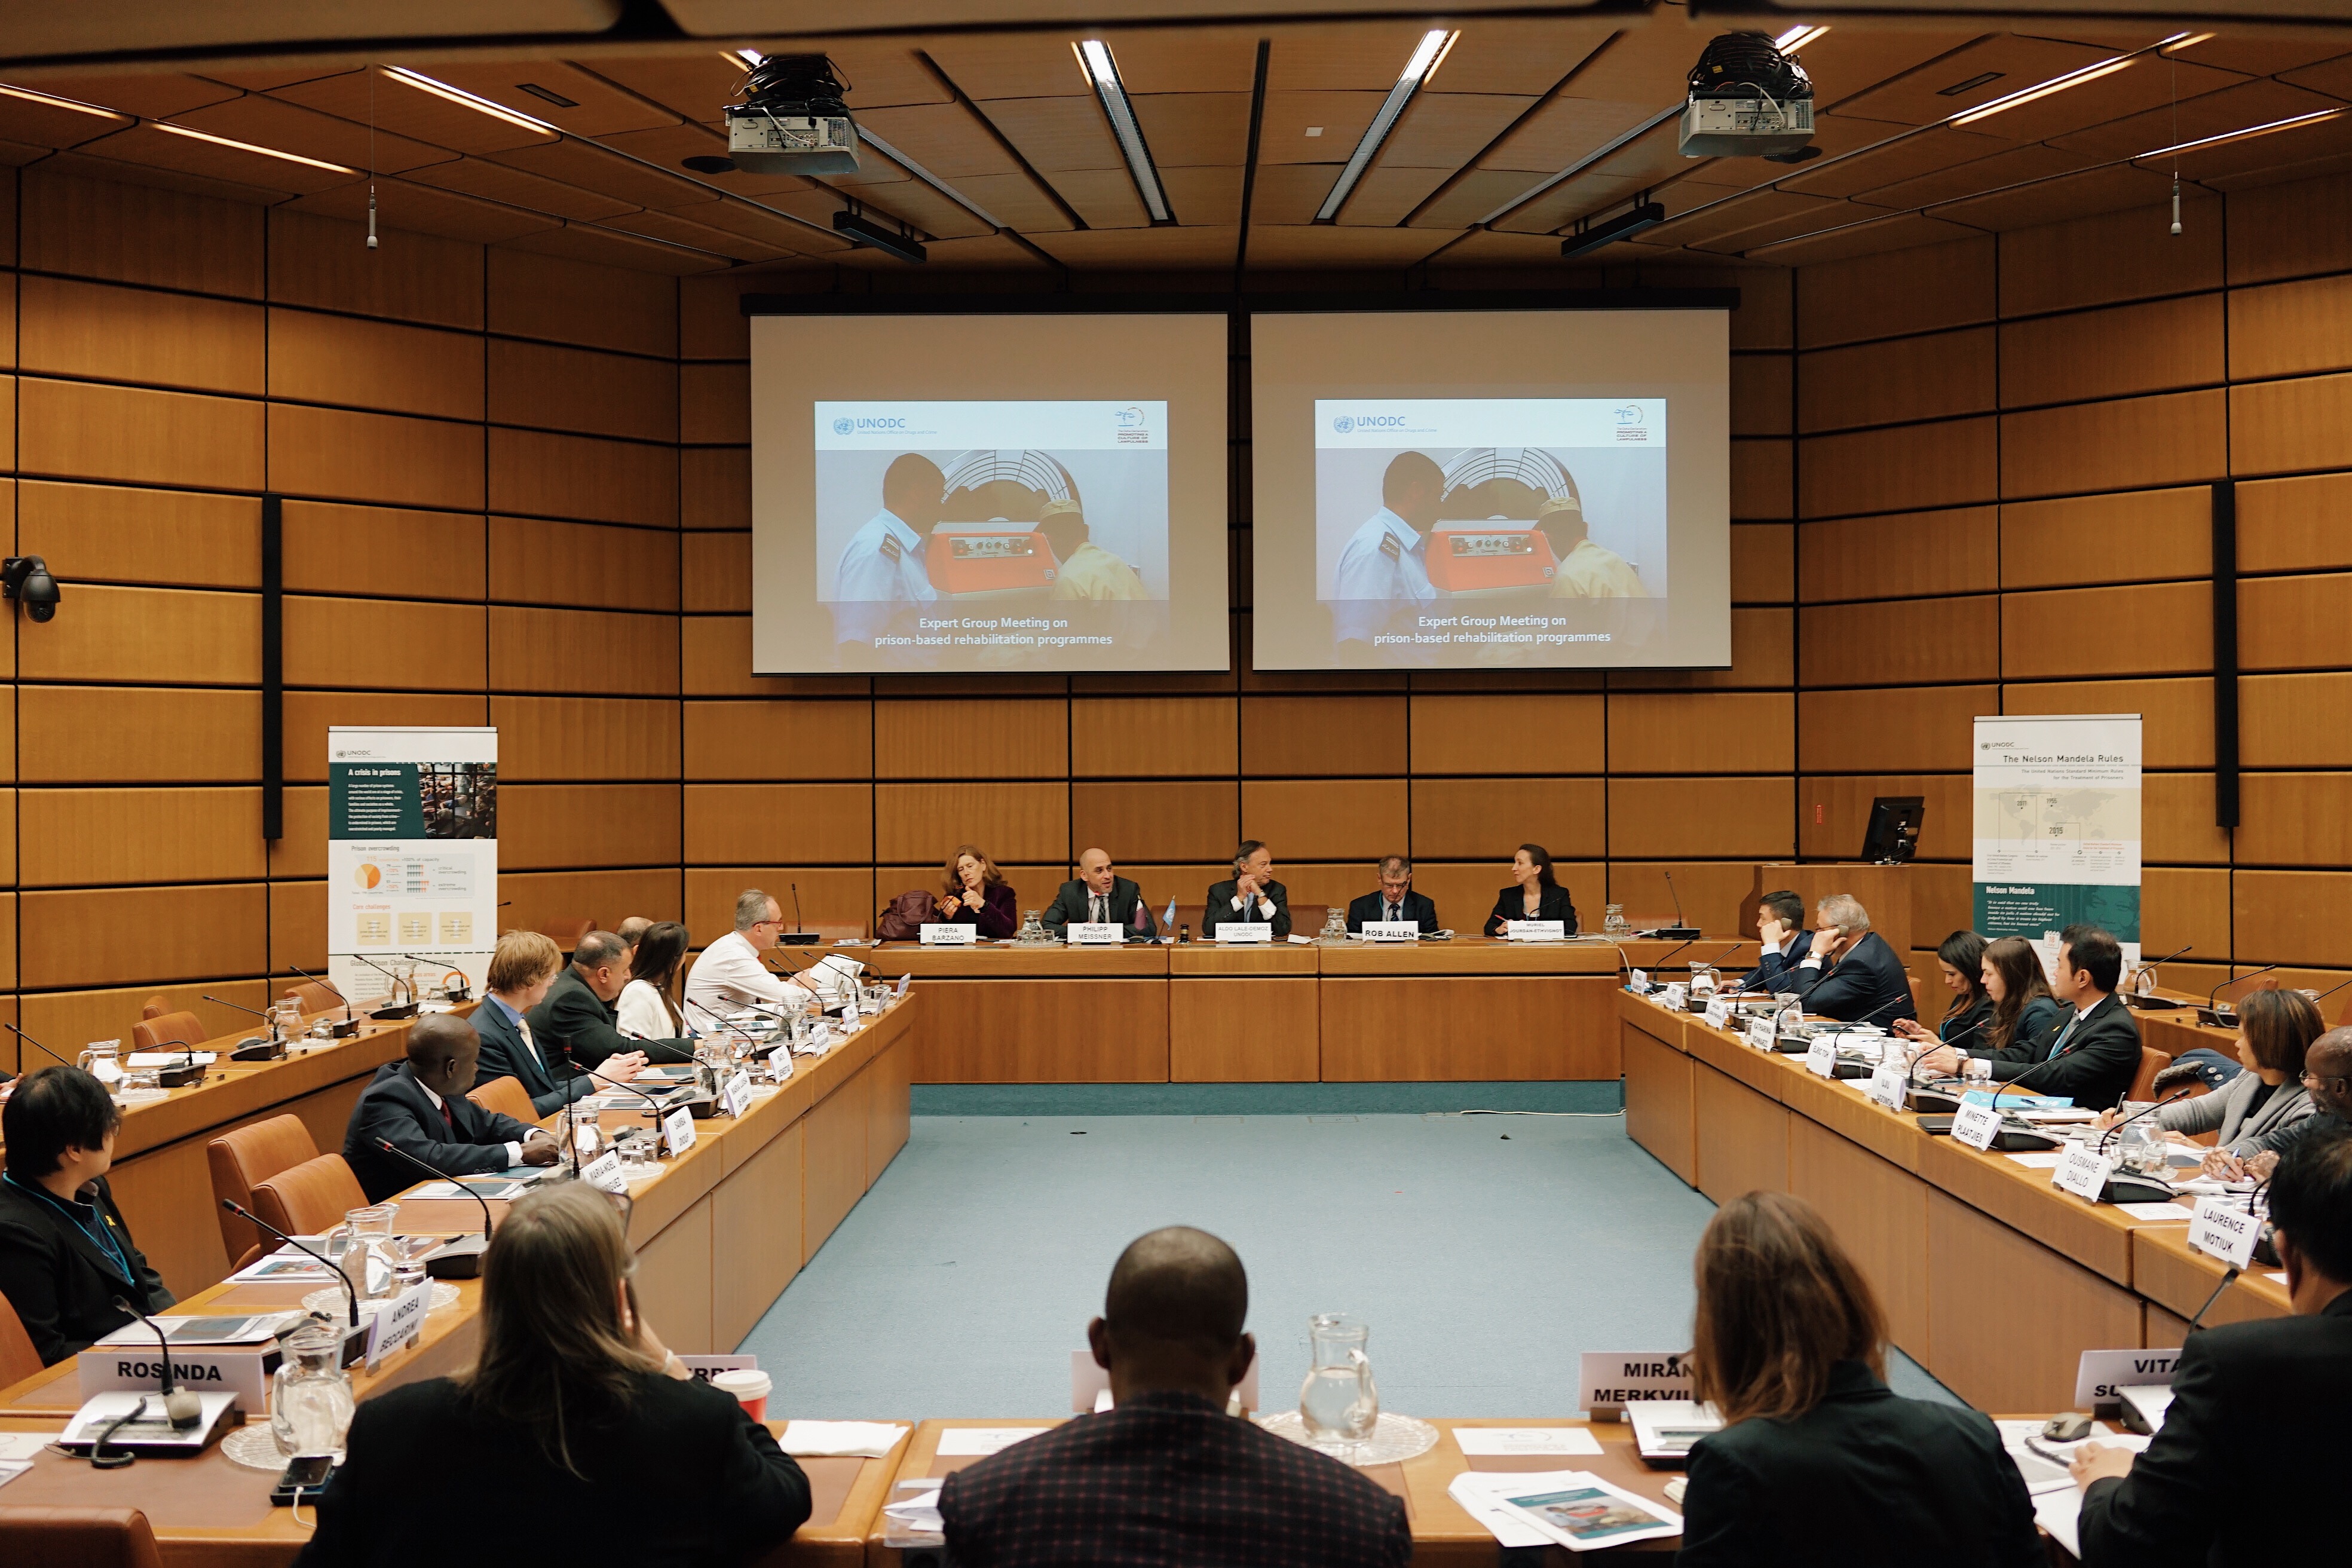 UNODC gathers penal reform leaders from across the globe to promote prison rehabilitation, reintegration and tackle re-offending